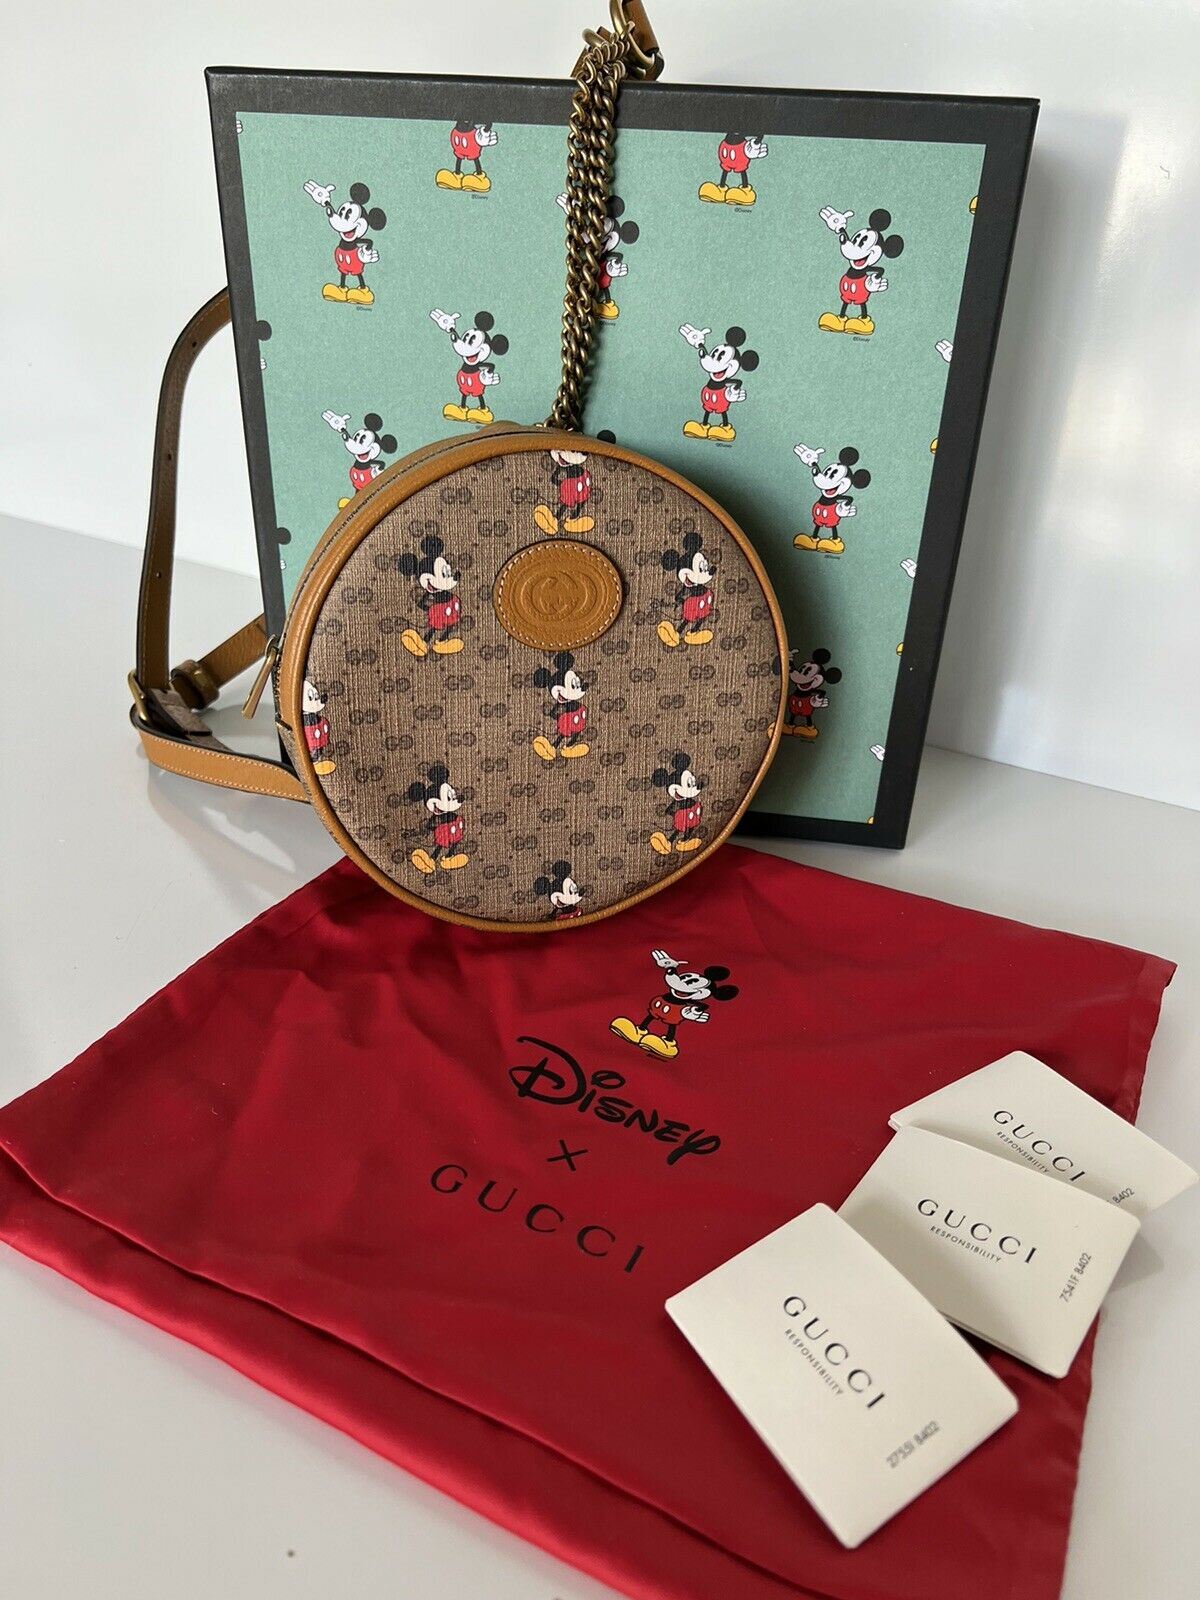 NWT Gucci Disney Mickey GG Mini Canvas Round Backpack Bag Limited Edition 603730